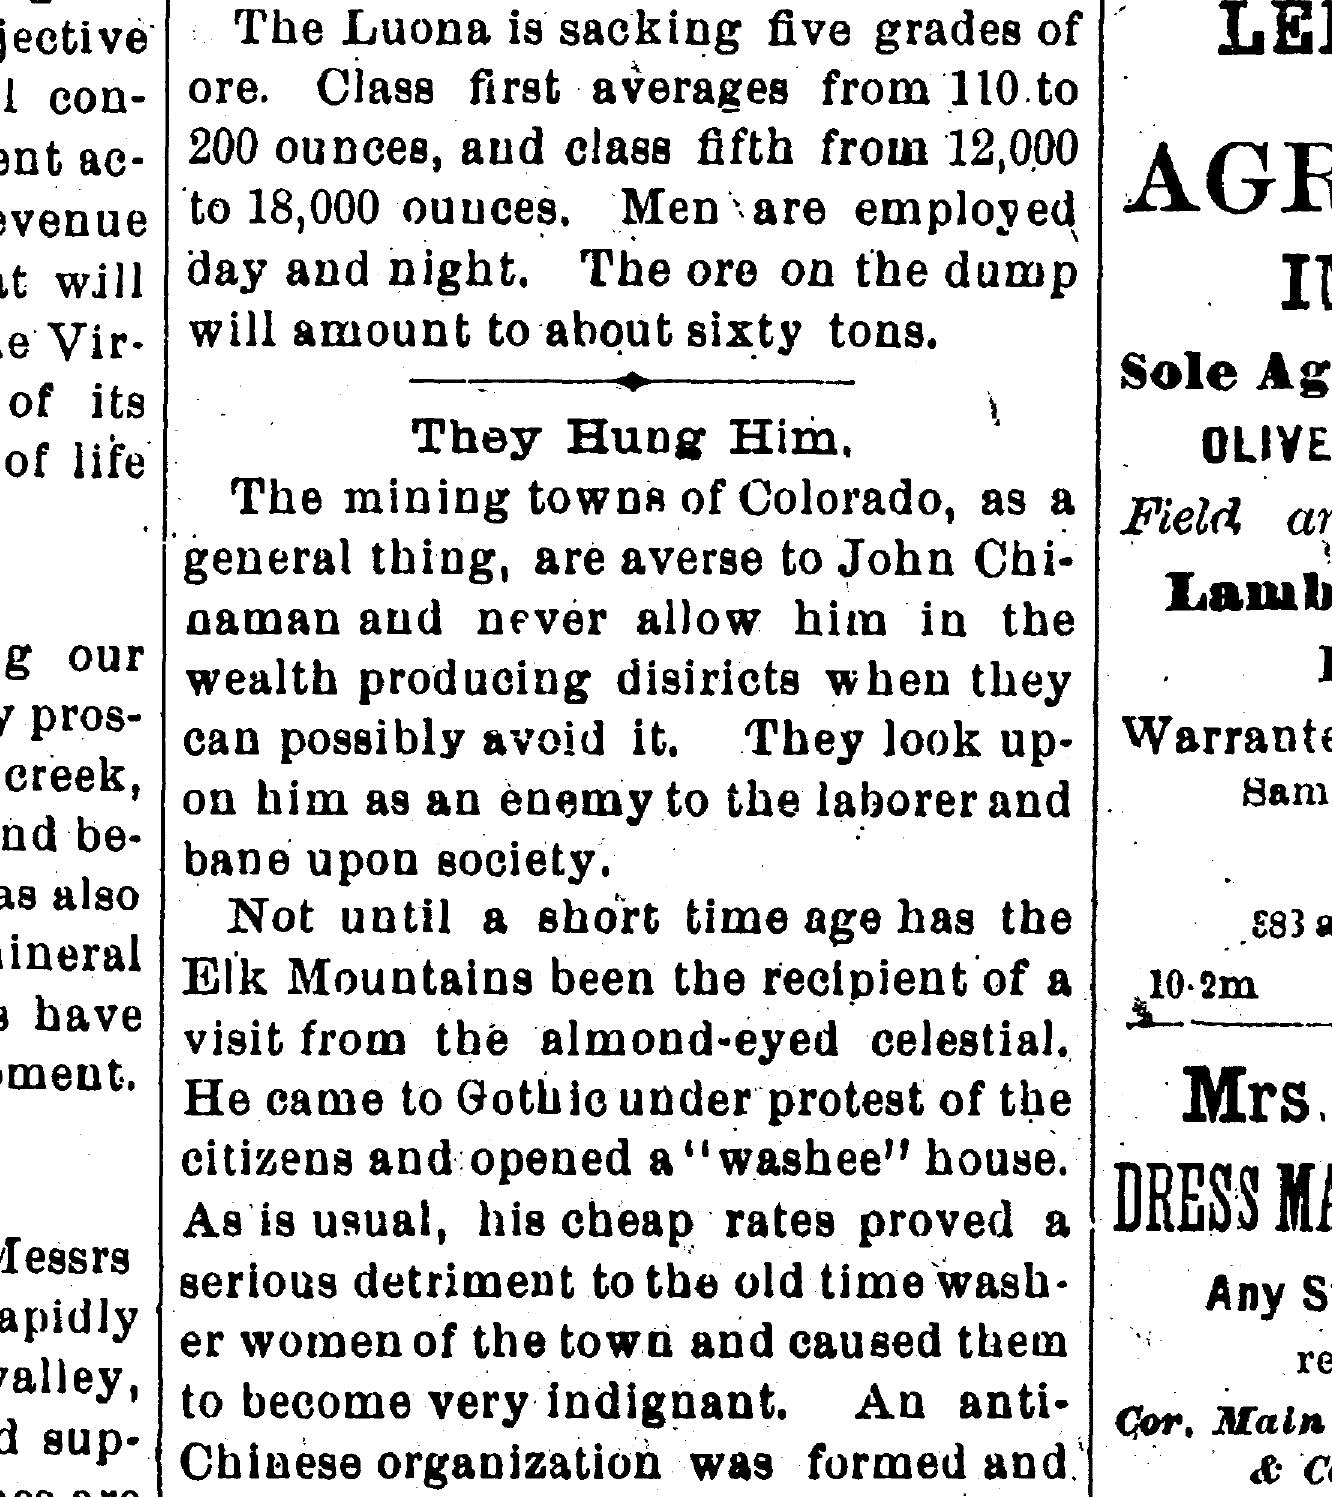 Image of a clip from a historical newspaper, reporting the story of discrimination against Chinese men in Colorado mining towns. The story begins, "They Hung Him. The mining towns of Colorado, as a general thing, are averse to John Chinaman and never allow him in the wealth producing districts when the can possibly avoid it. They look upon him as an enemy to the laborer and bane upon society. Not until a short time ago has the Elk Mountains been the recipient of a visit from the almond-eyed celestial..."